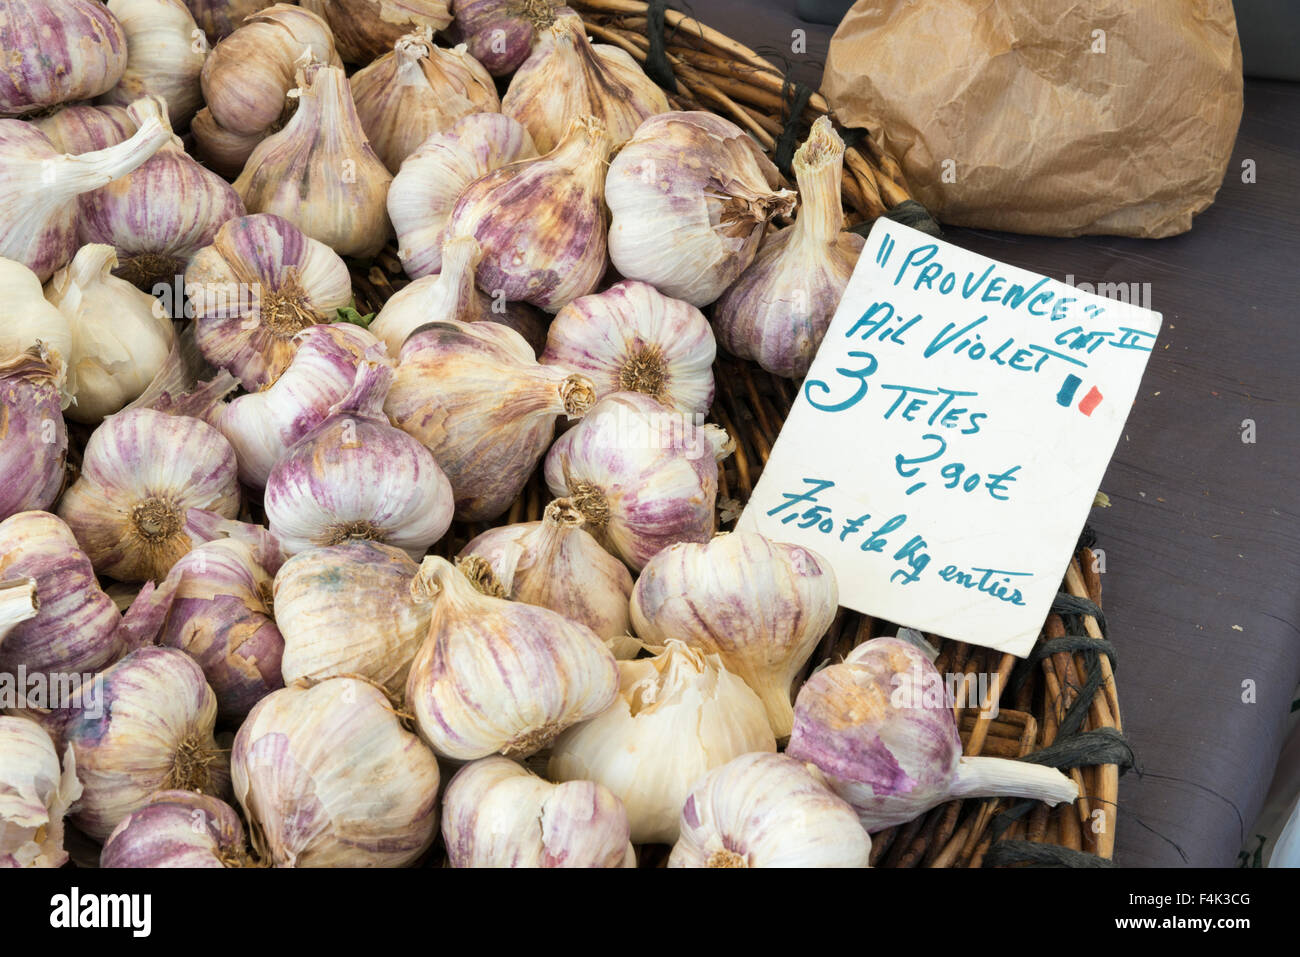 Garlic for sale in a market in Provence France with a price label and sign Stock Photo